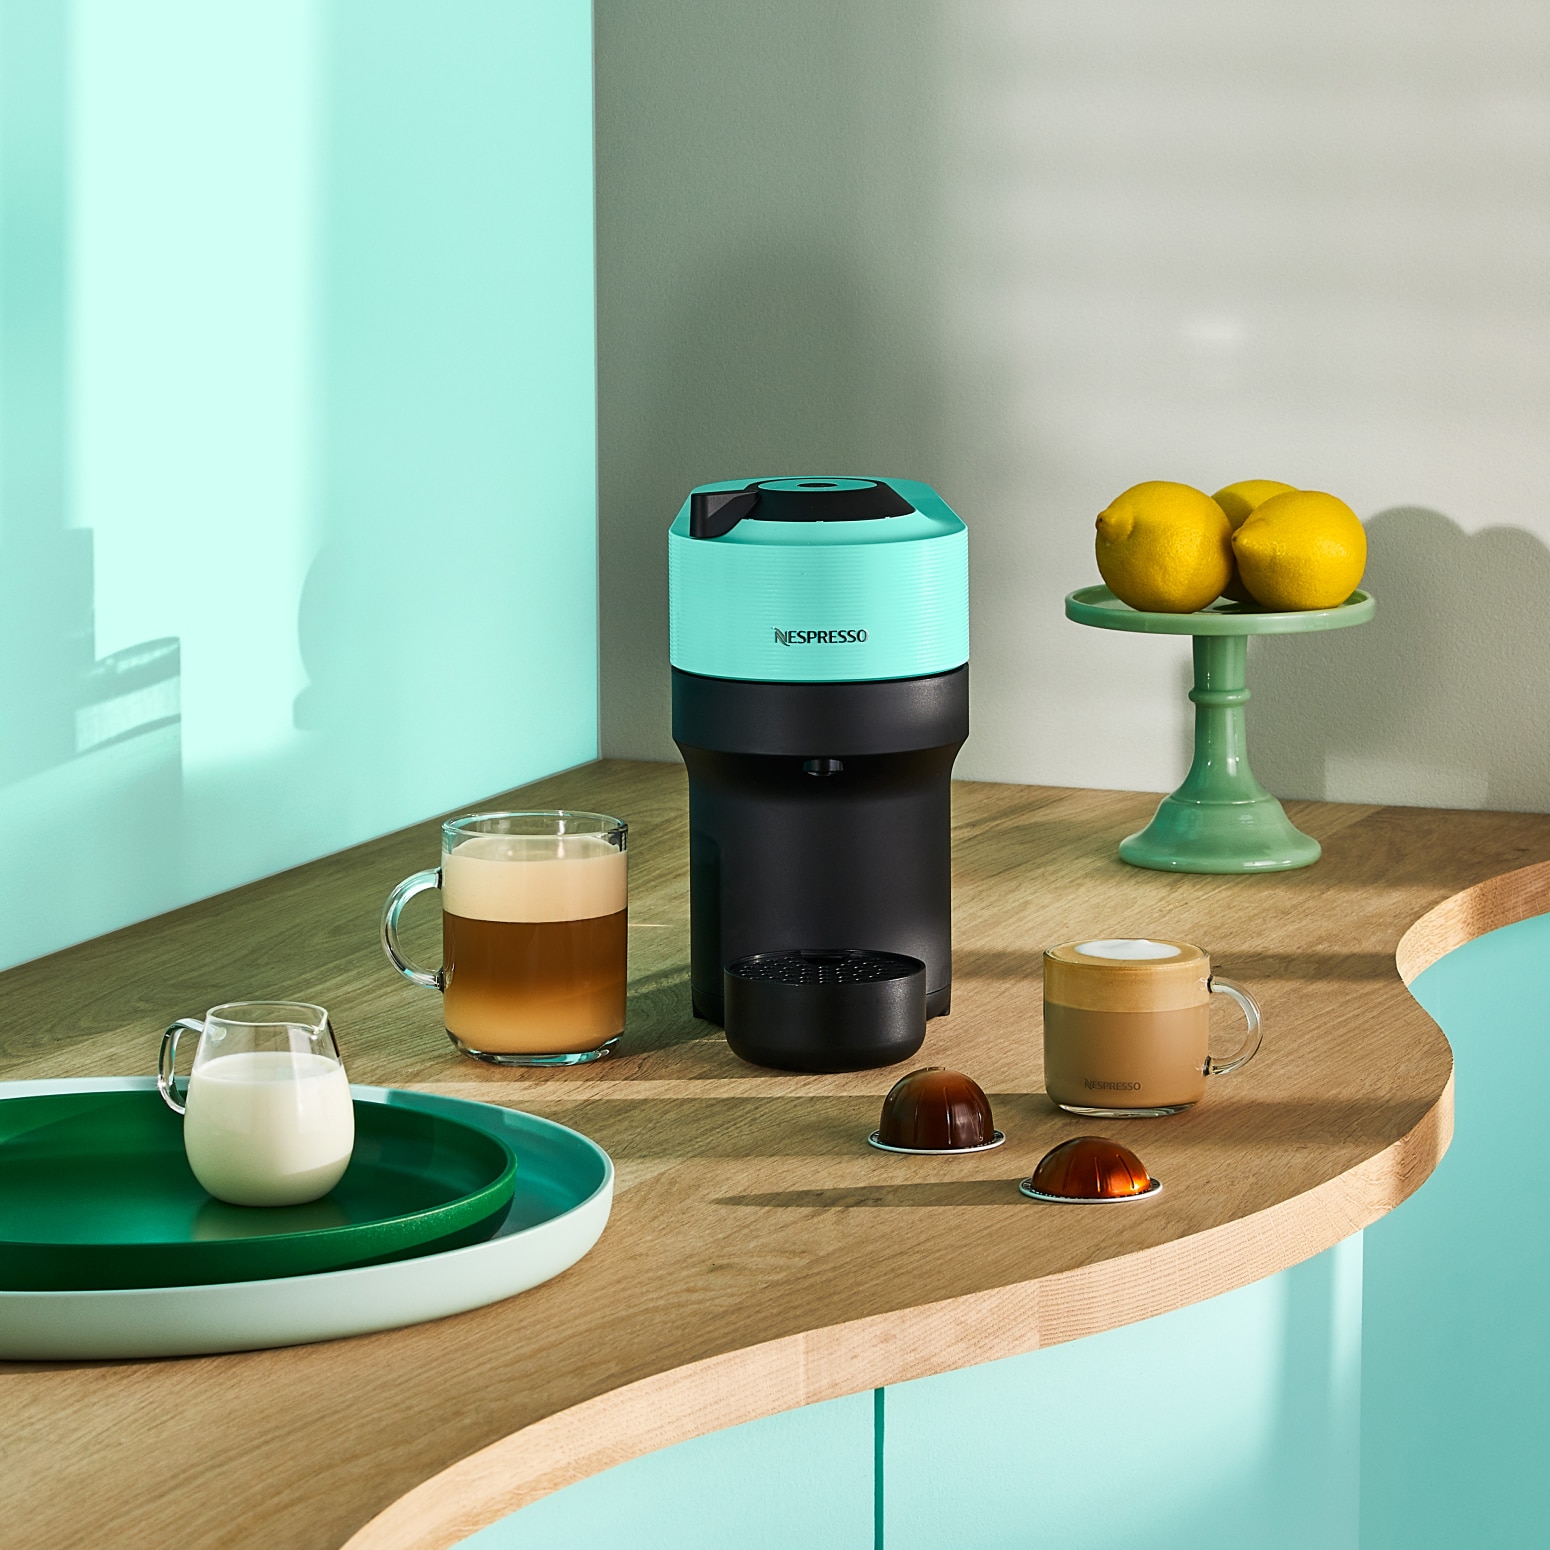 https://www.nespresso.com/shared_res/agility/global/machines/vl/gallery-image/vertuo-pop_green_milk-coffees_2x.jpg